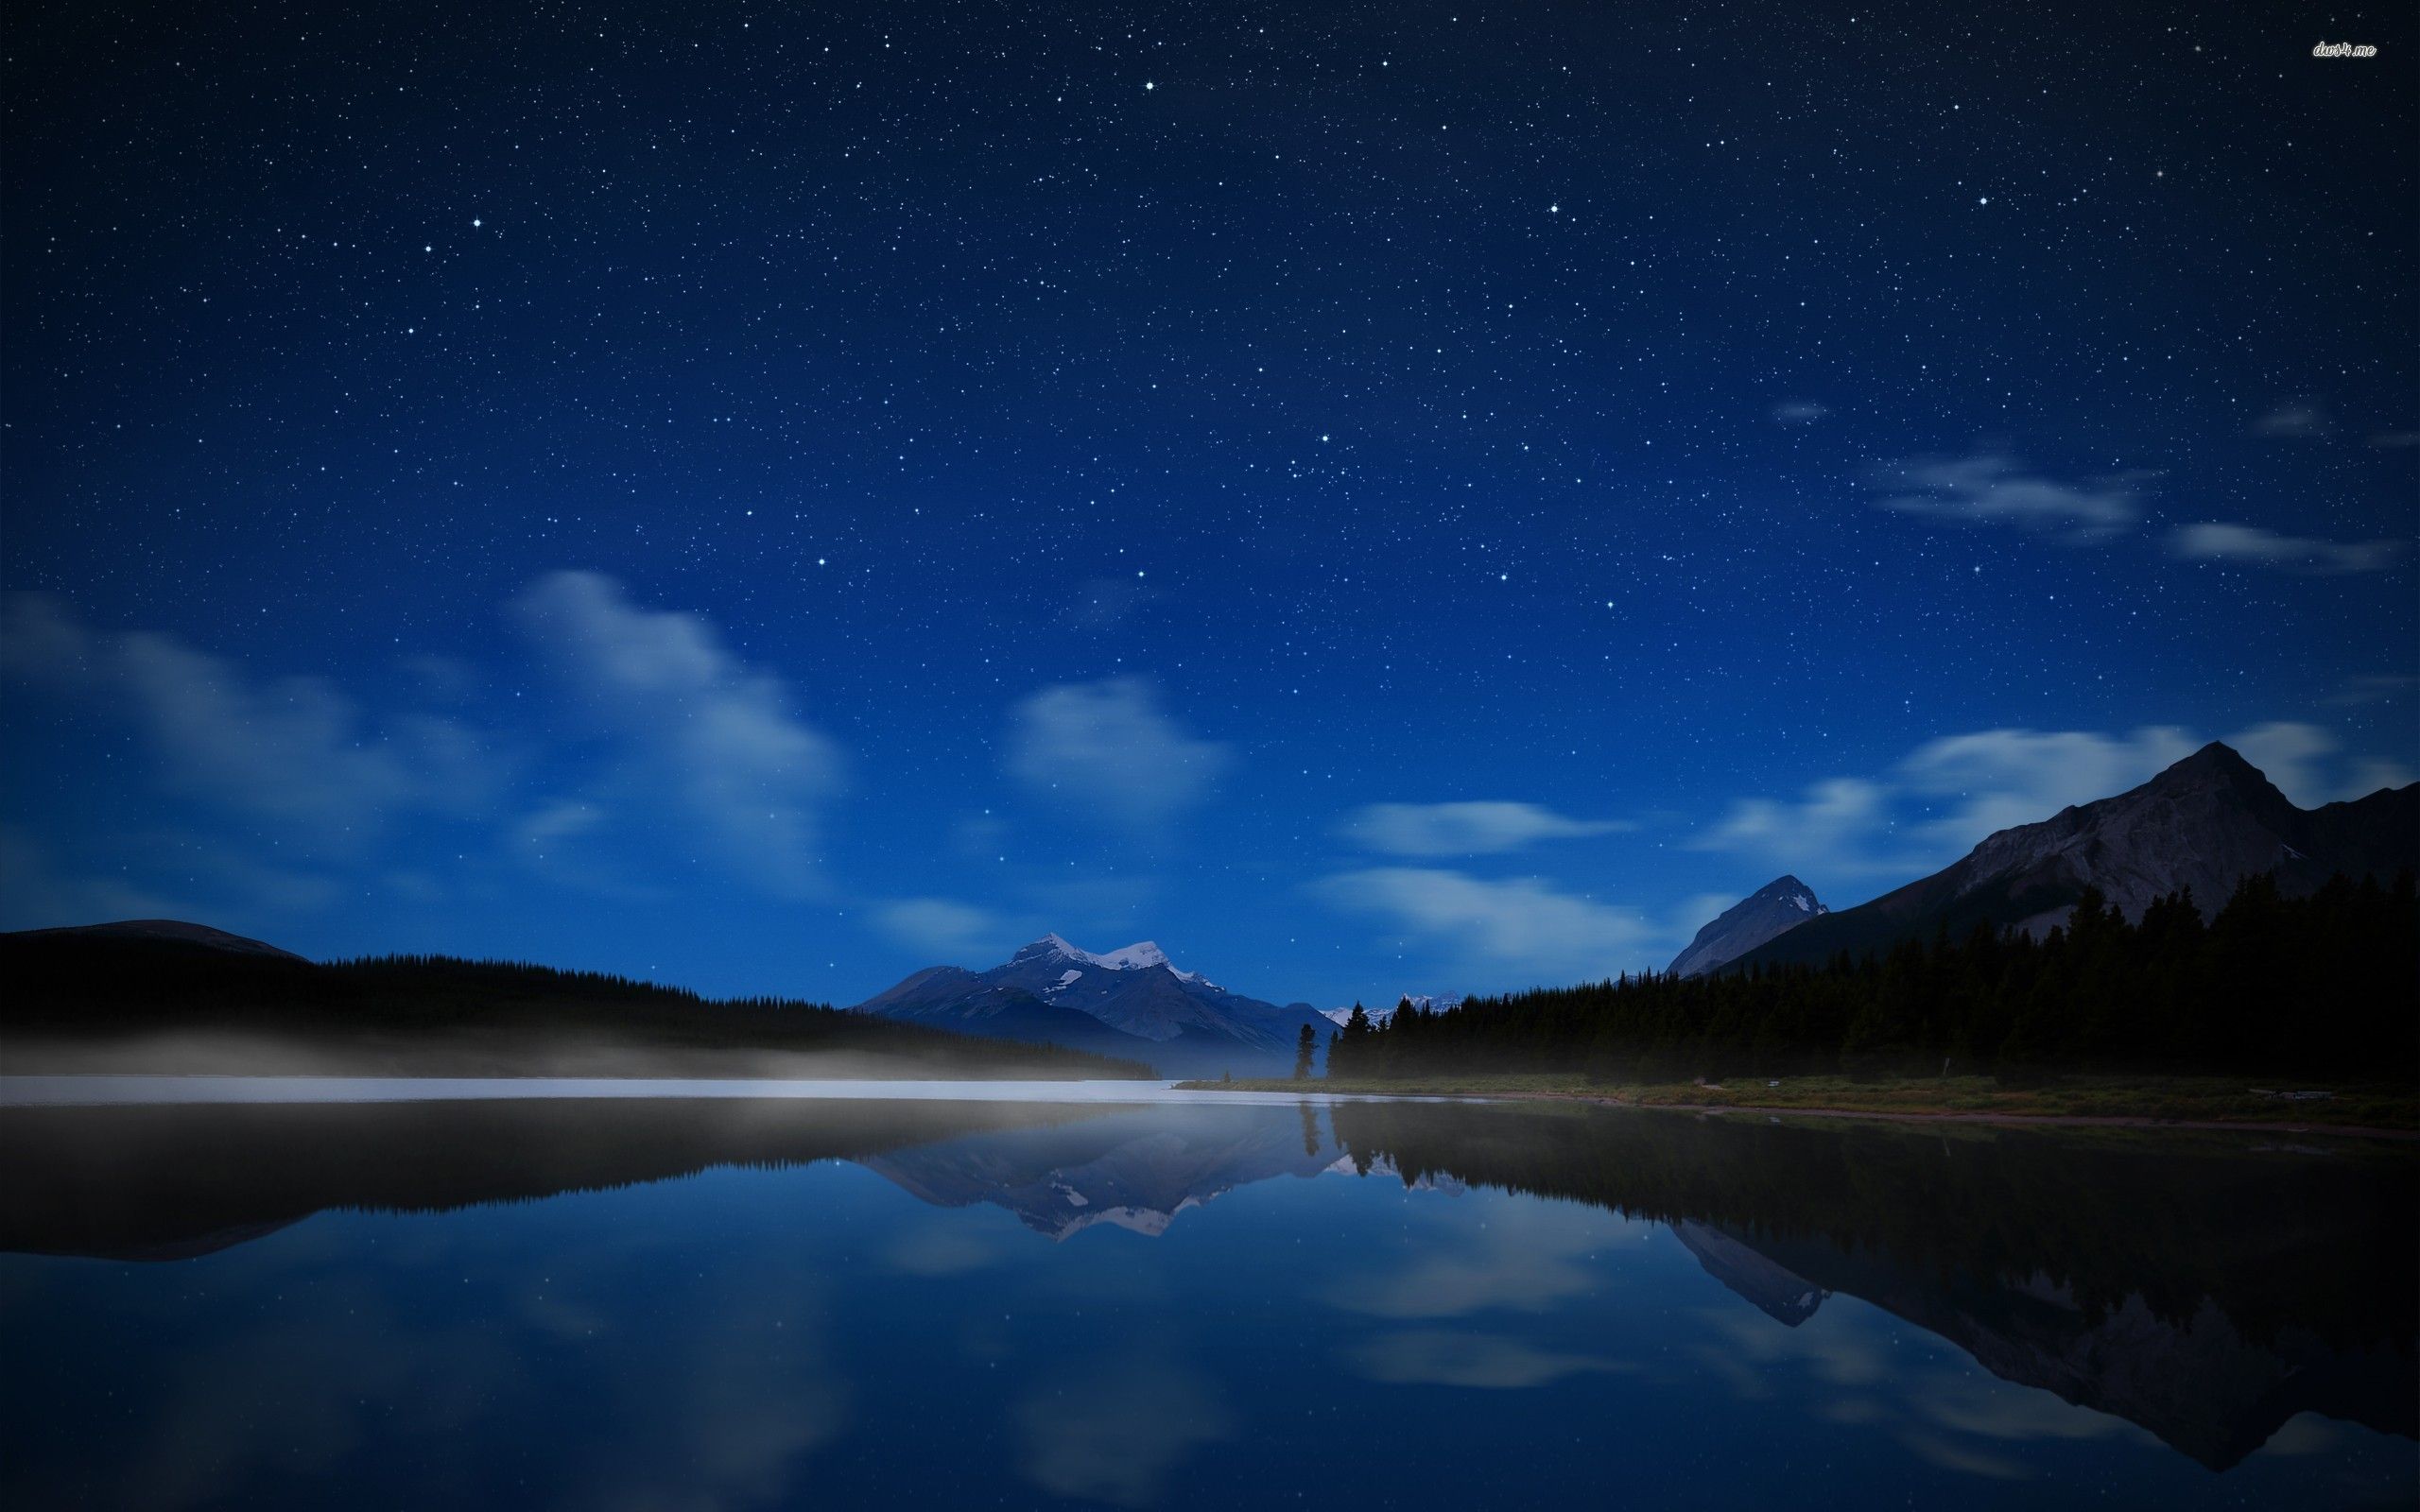 Star filled night sky wallpaper - Nature wallpapers